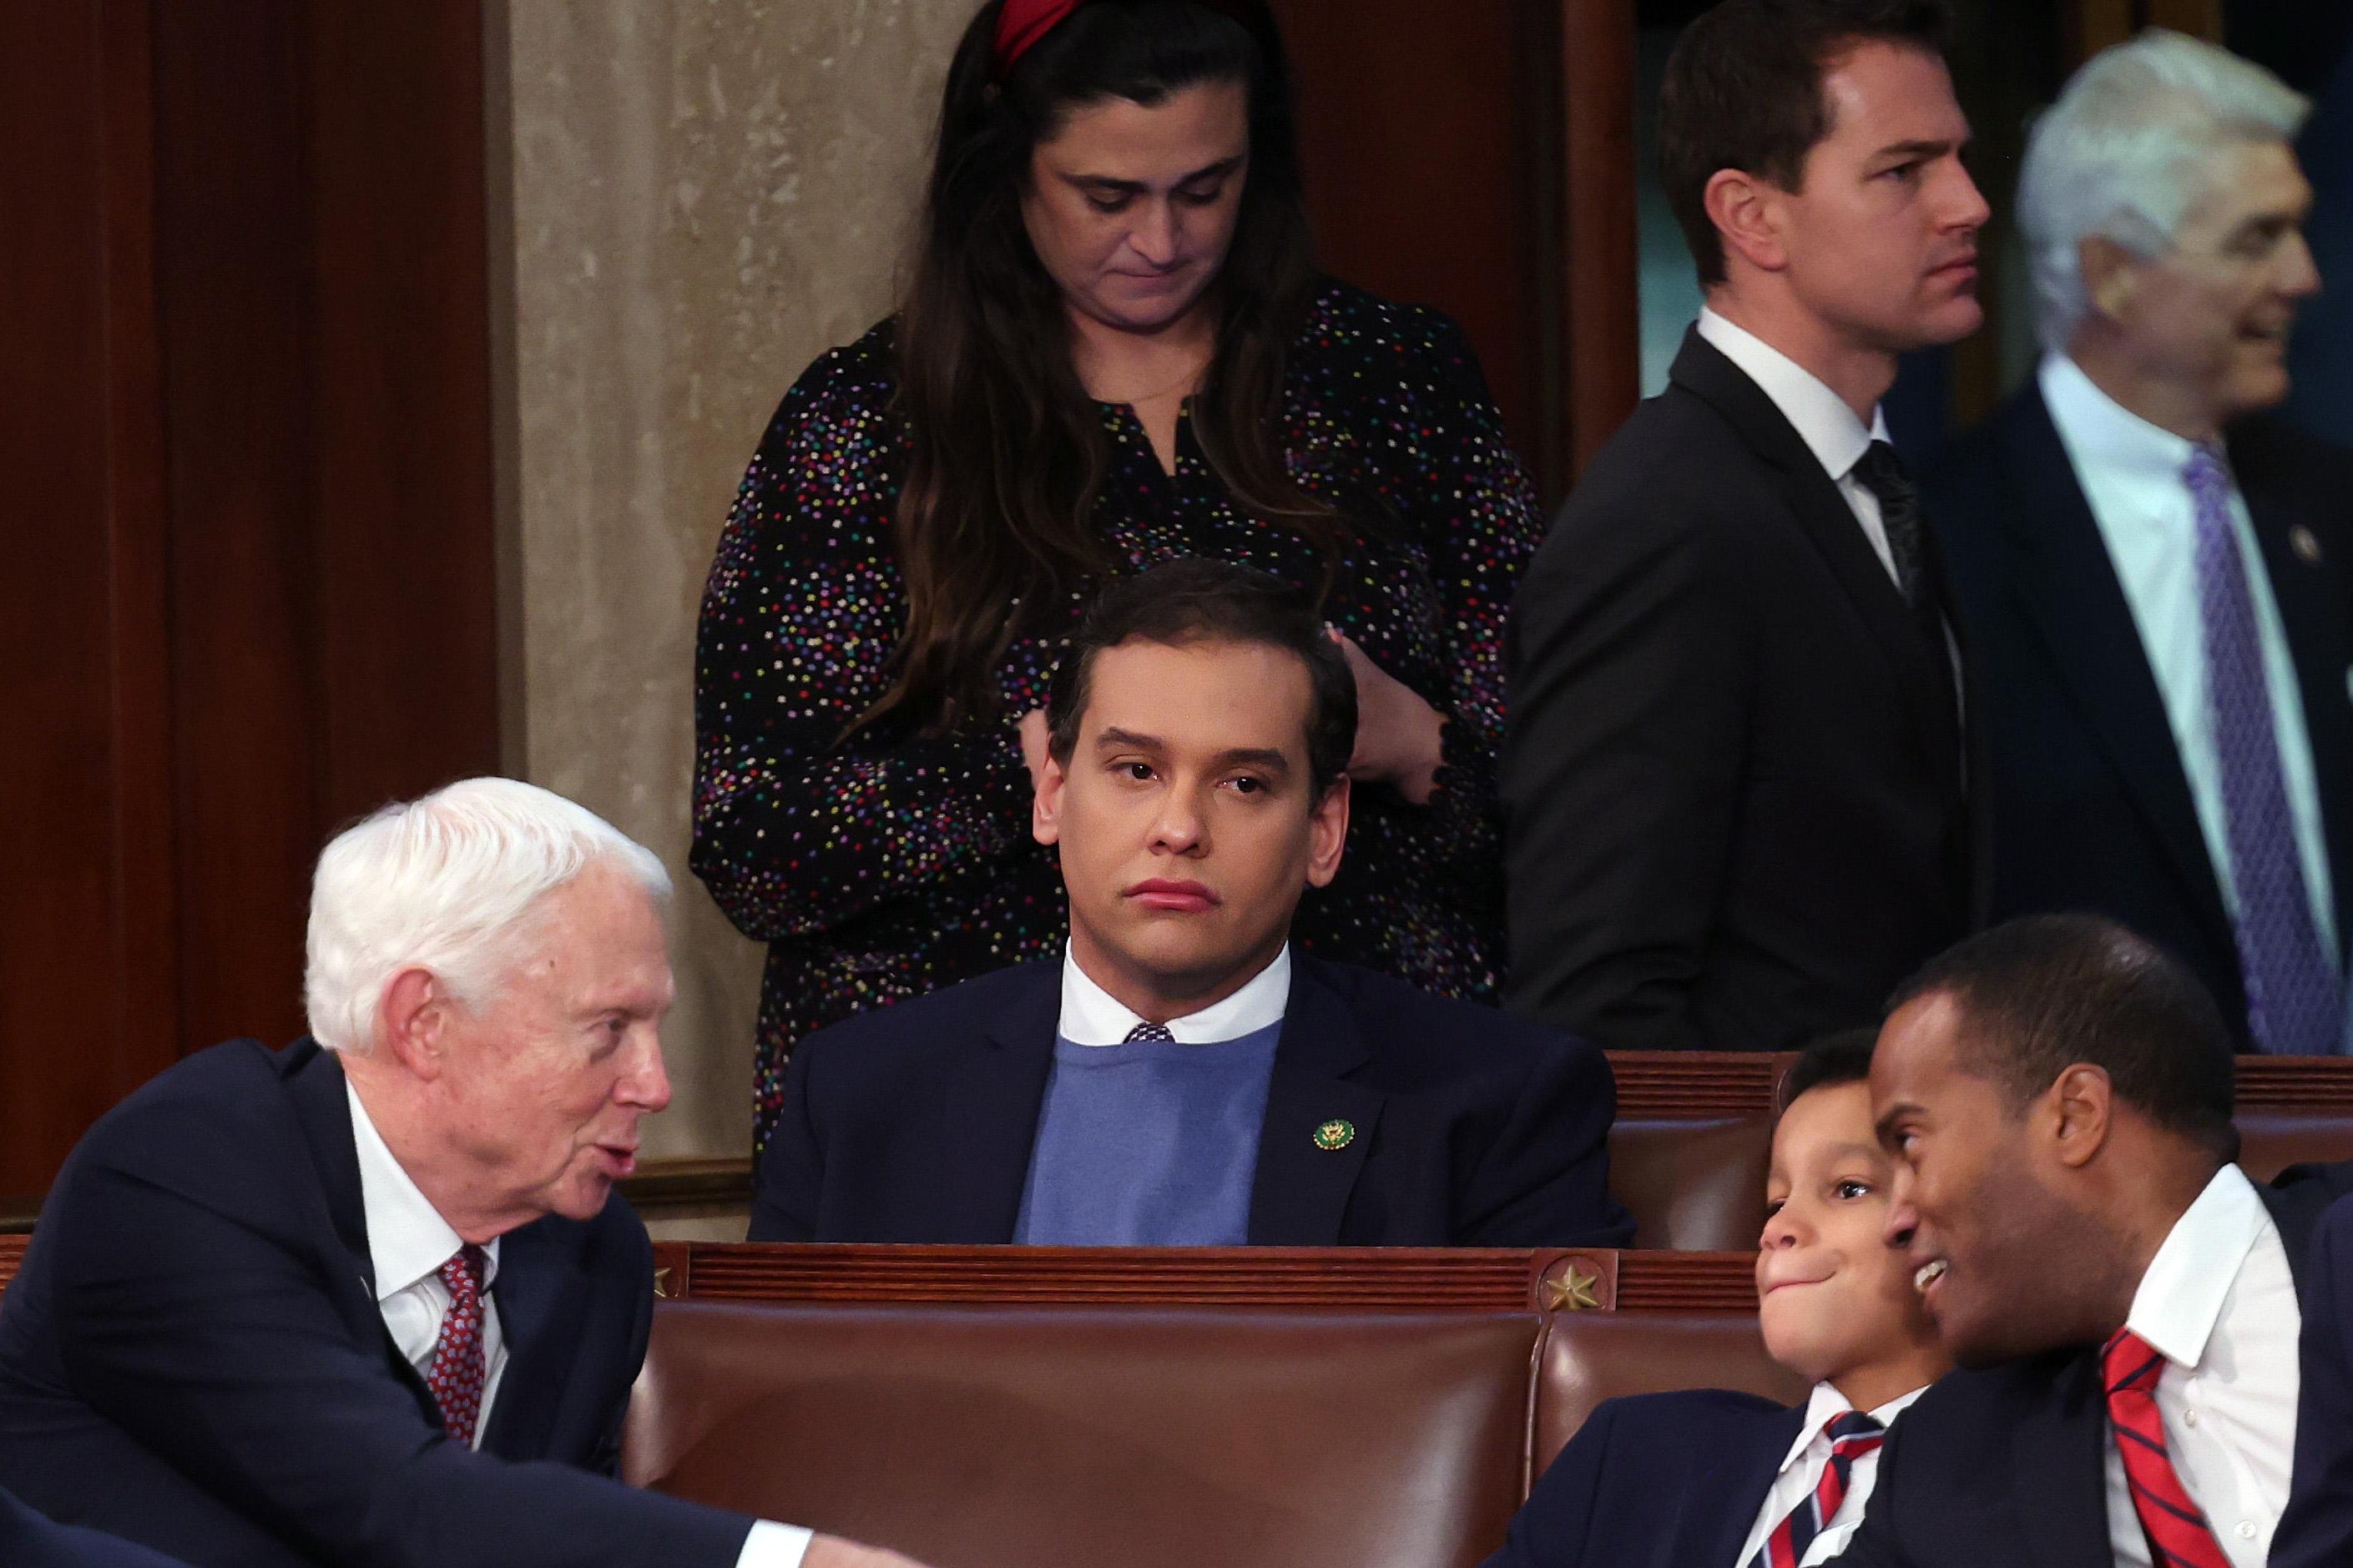 George Santos, an incoming House rep. from New York who lied about nearly every aspect of his background and biography, looking forlorn, in the midst of other people shaking hands, in Congress.